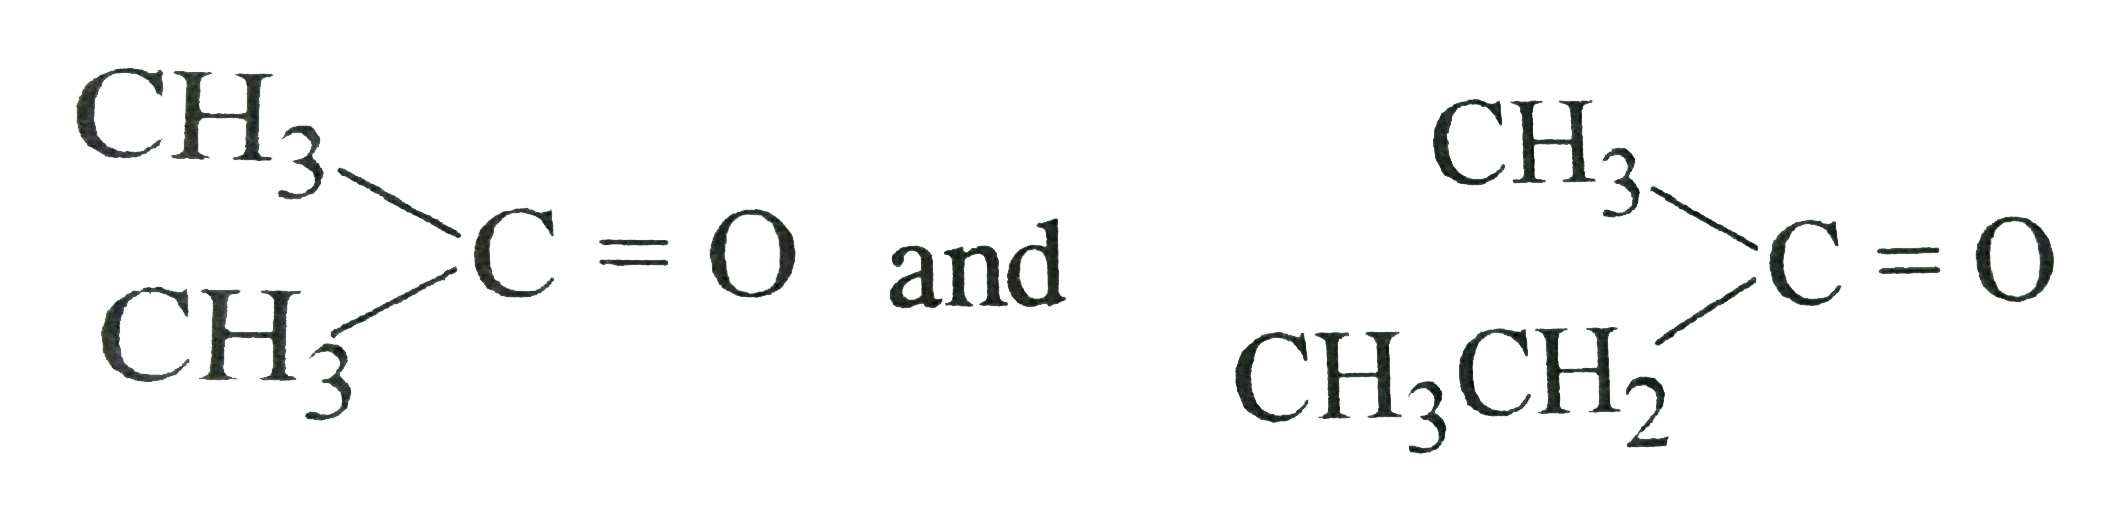 An alkene having molecular formula C(7)H(14) was subjected to ozonolysis in the presence of zinc dust.An equimolar amount of the following two compounds was obtained        The IUPAC name of the alkene is